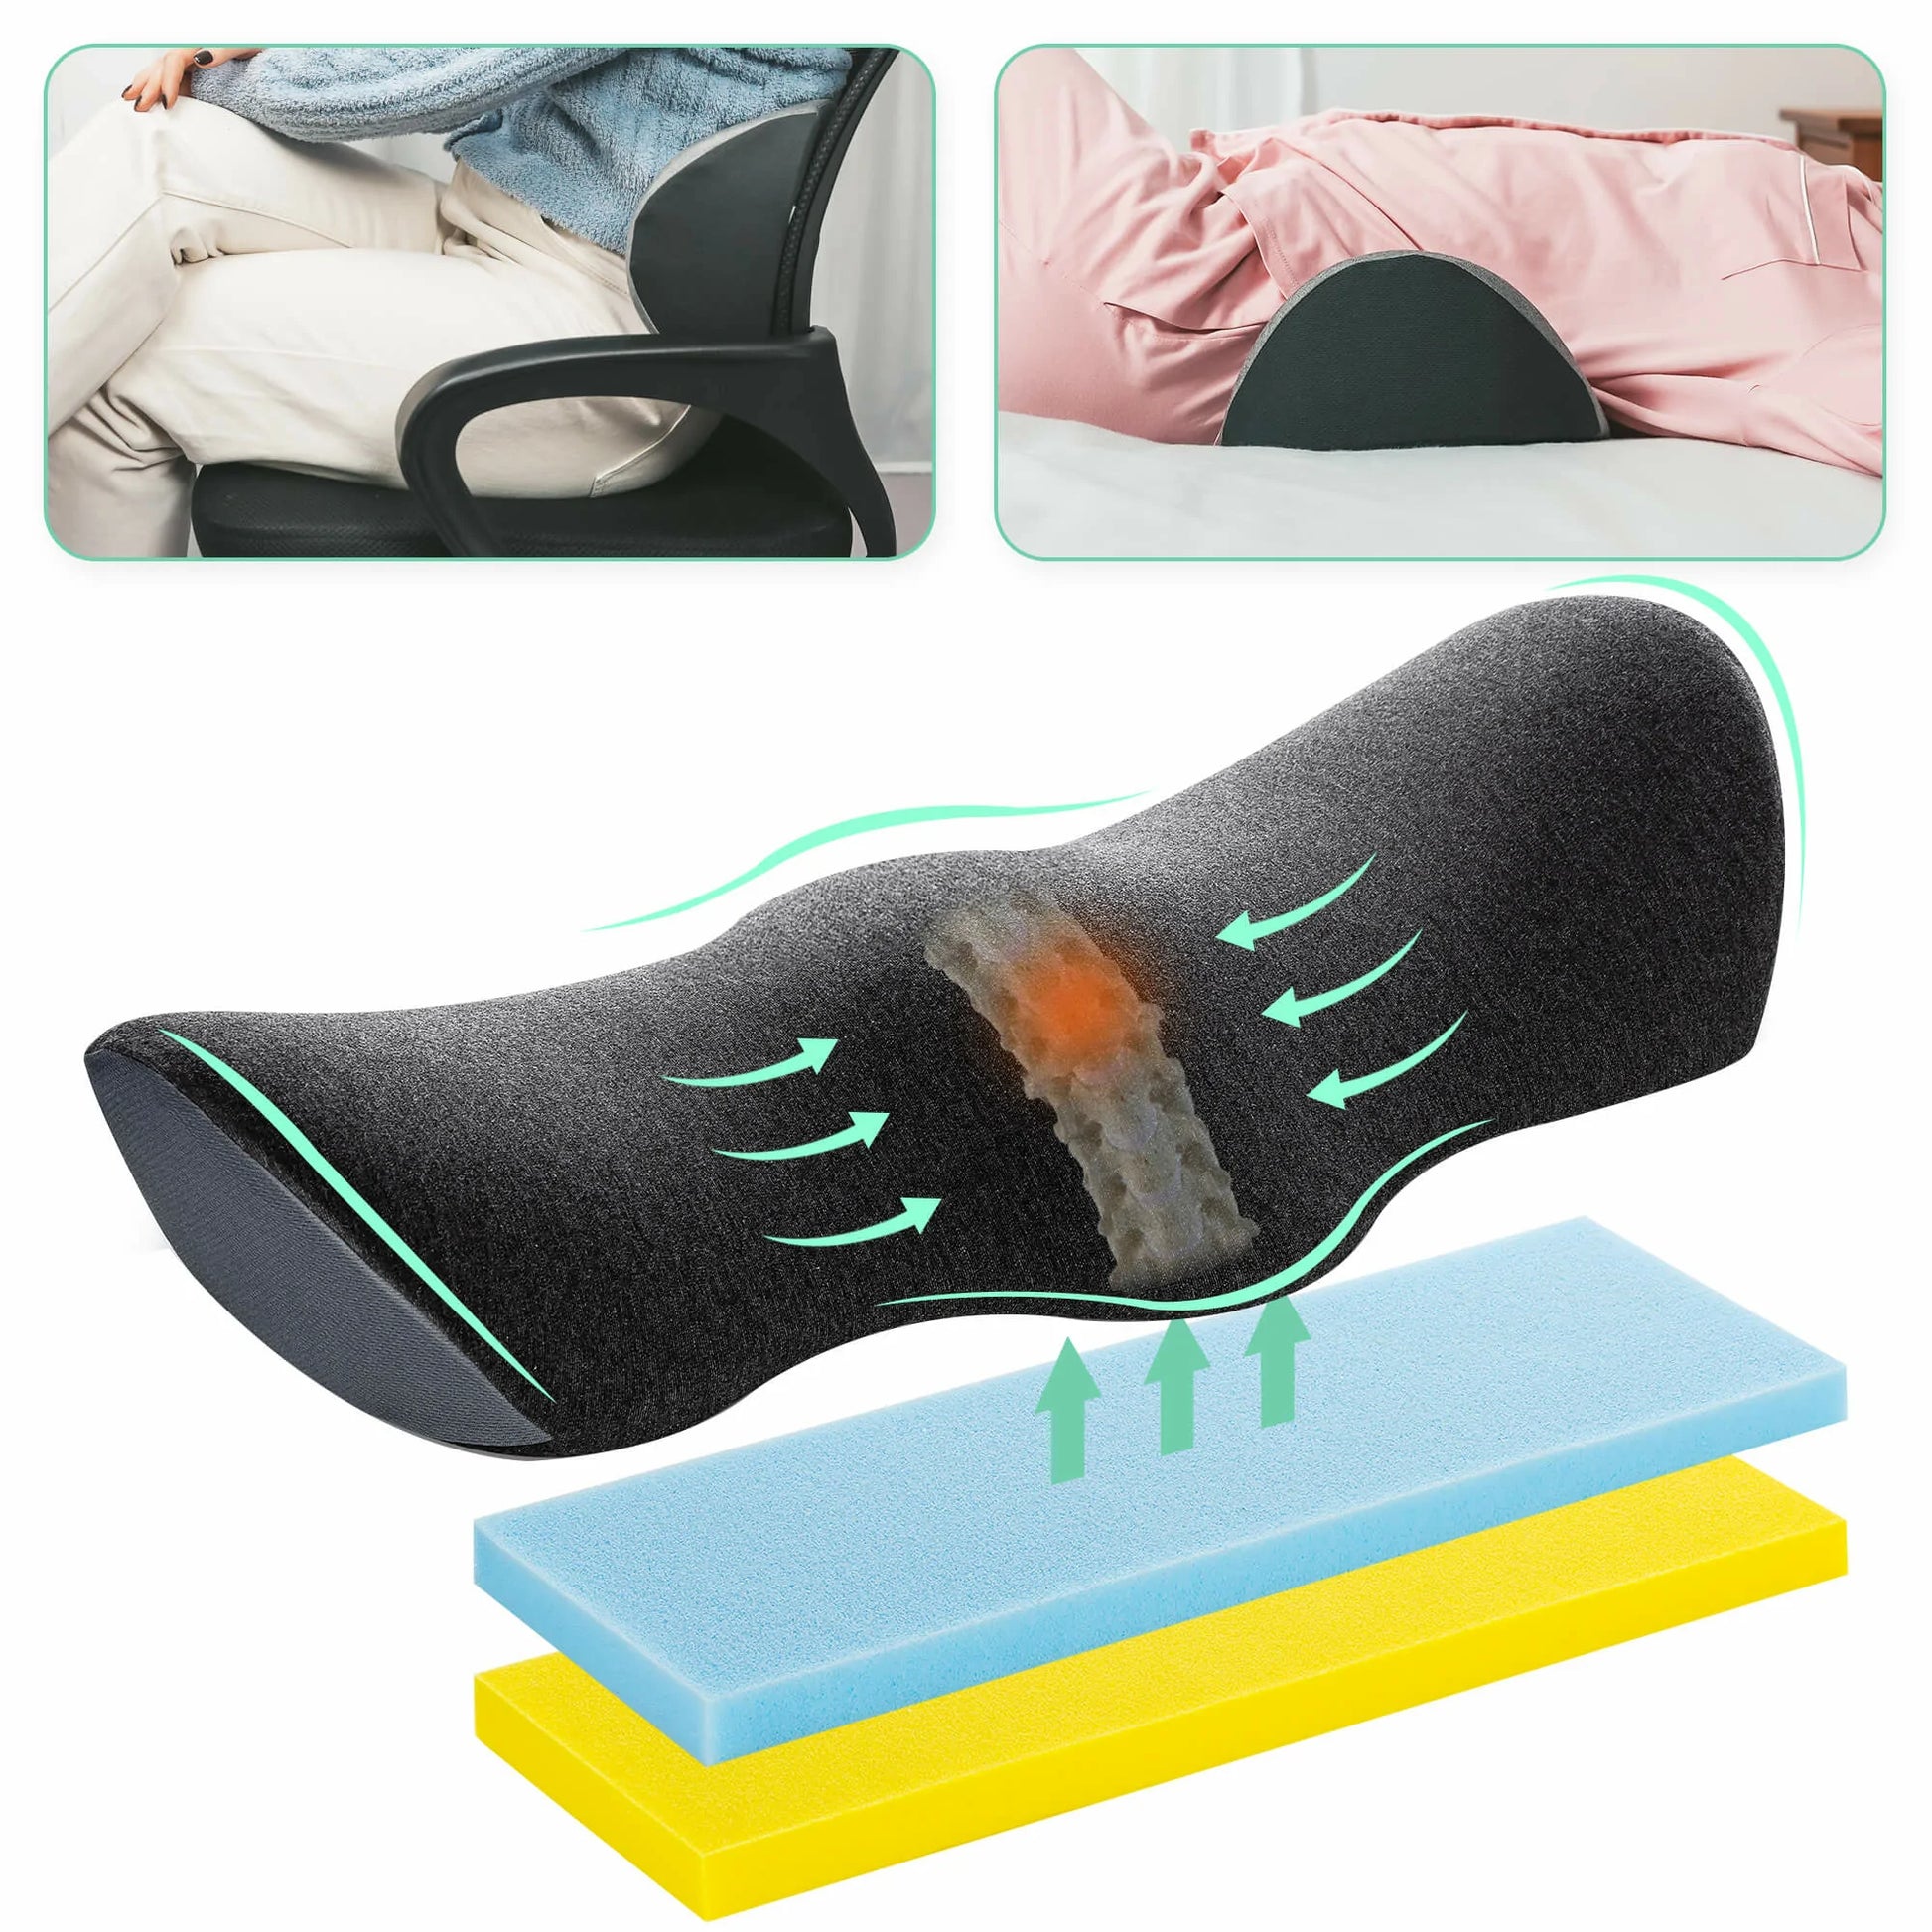 Lumbar Support Pillow for Back Support Memory Foam Pillow for Sleeping in  Bed Waist Support Cushion for Lower Back Pain Relief for Office Chair and